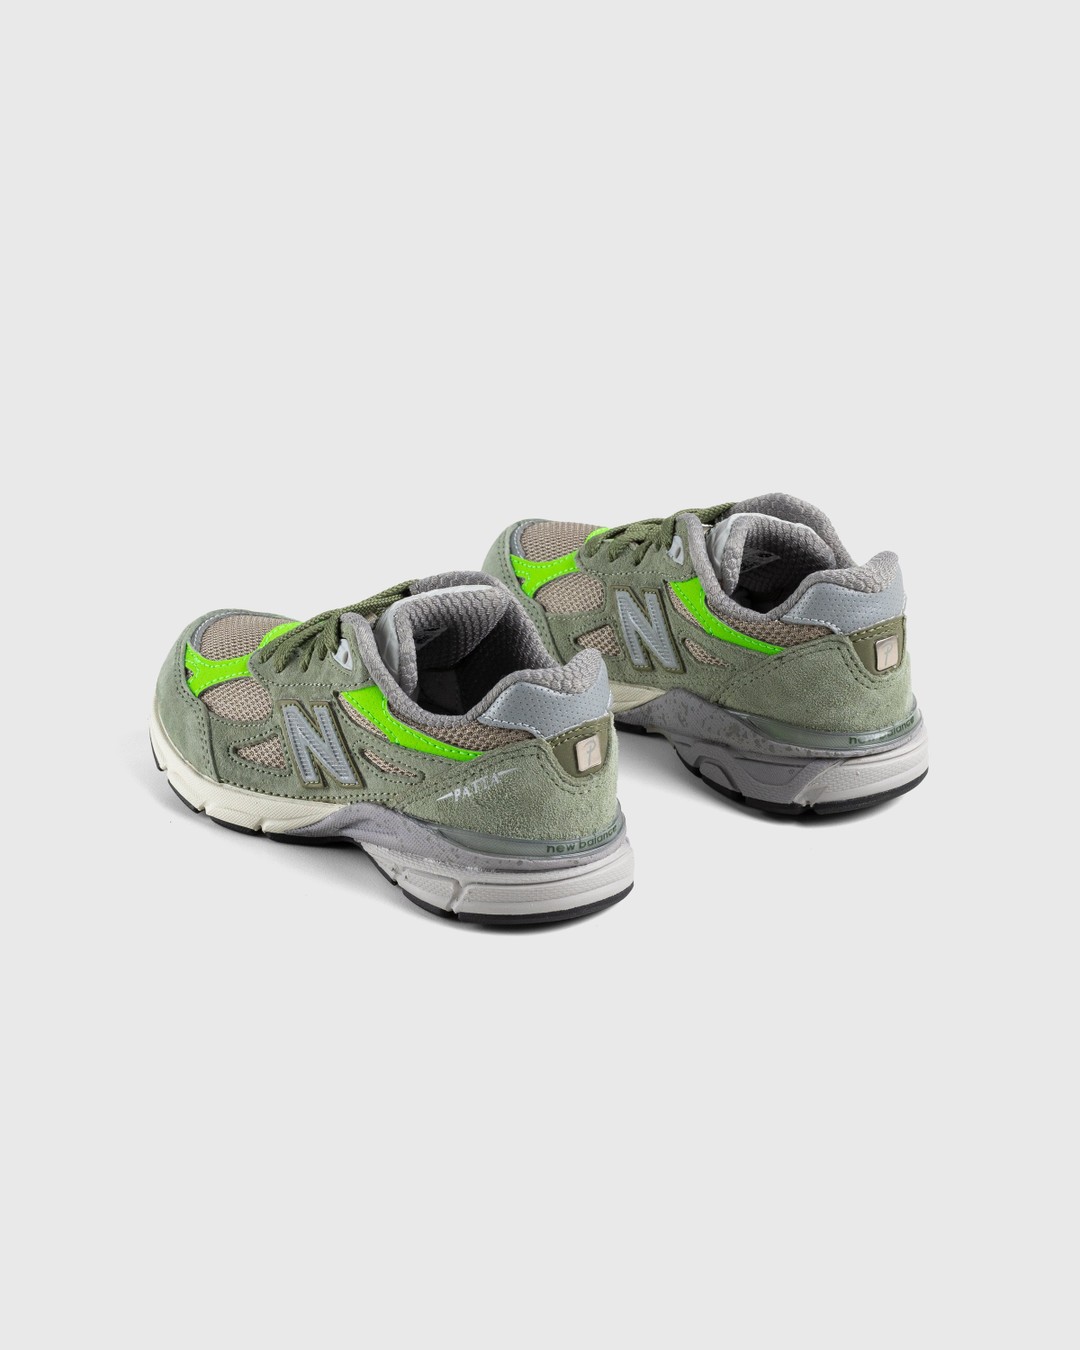 Patta x New Balance – Made in USA 990v3 Olive/White Pepper - Sneakers - Green - Image 2